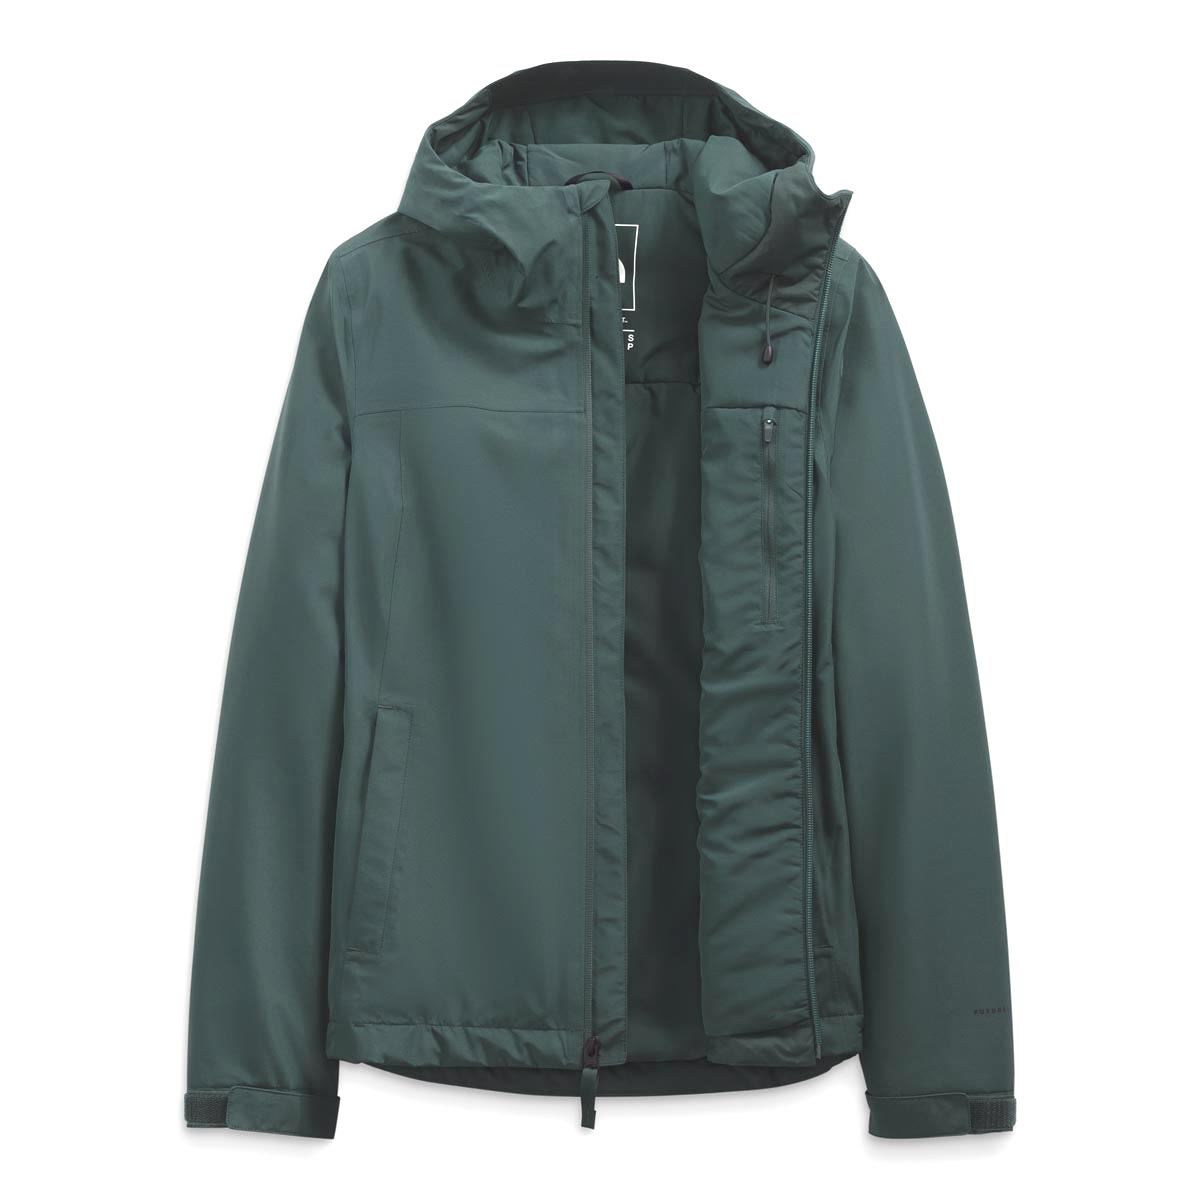 The North Face Women's Dryzzle Futurelight Insulated Jacket